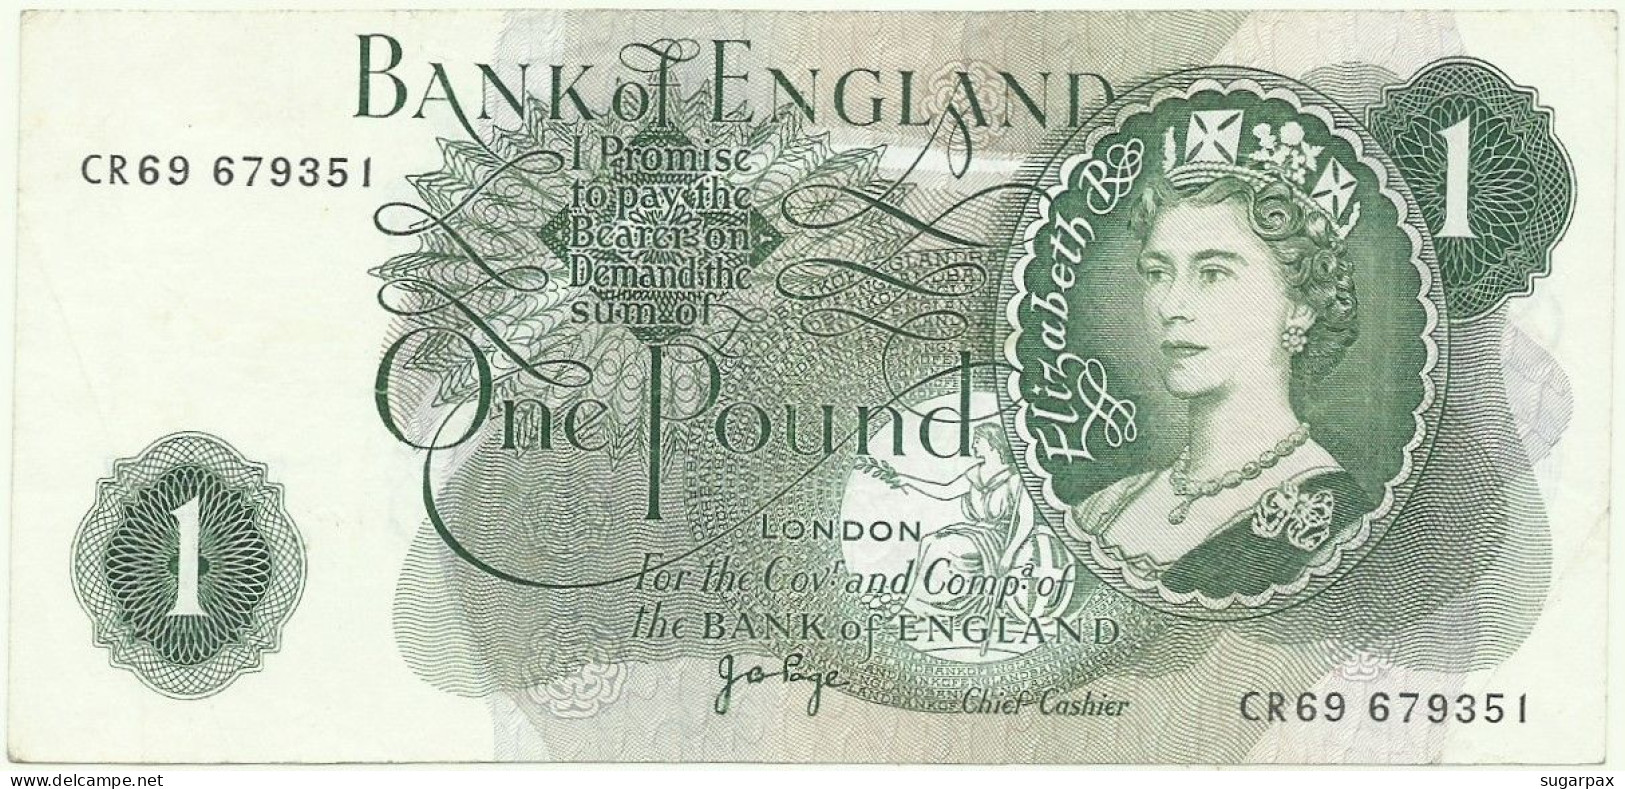 GREAT BRITAIN - 1 POUND - ND ( 1970-77 ) - P 374 G - Serie CR69 - BANK OF ENGLAND - United Kingdom - 1 Pond